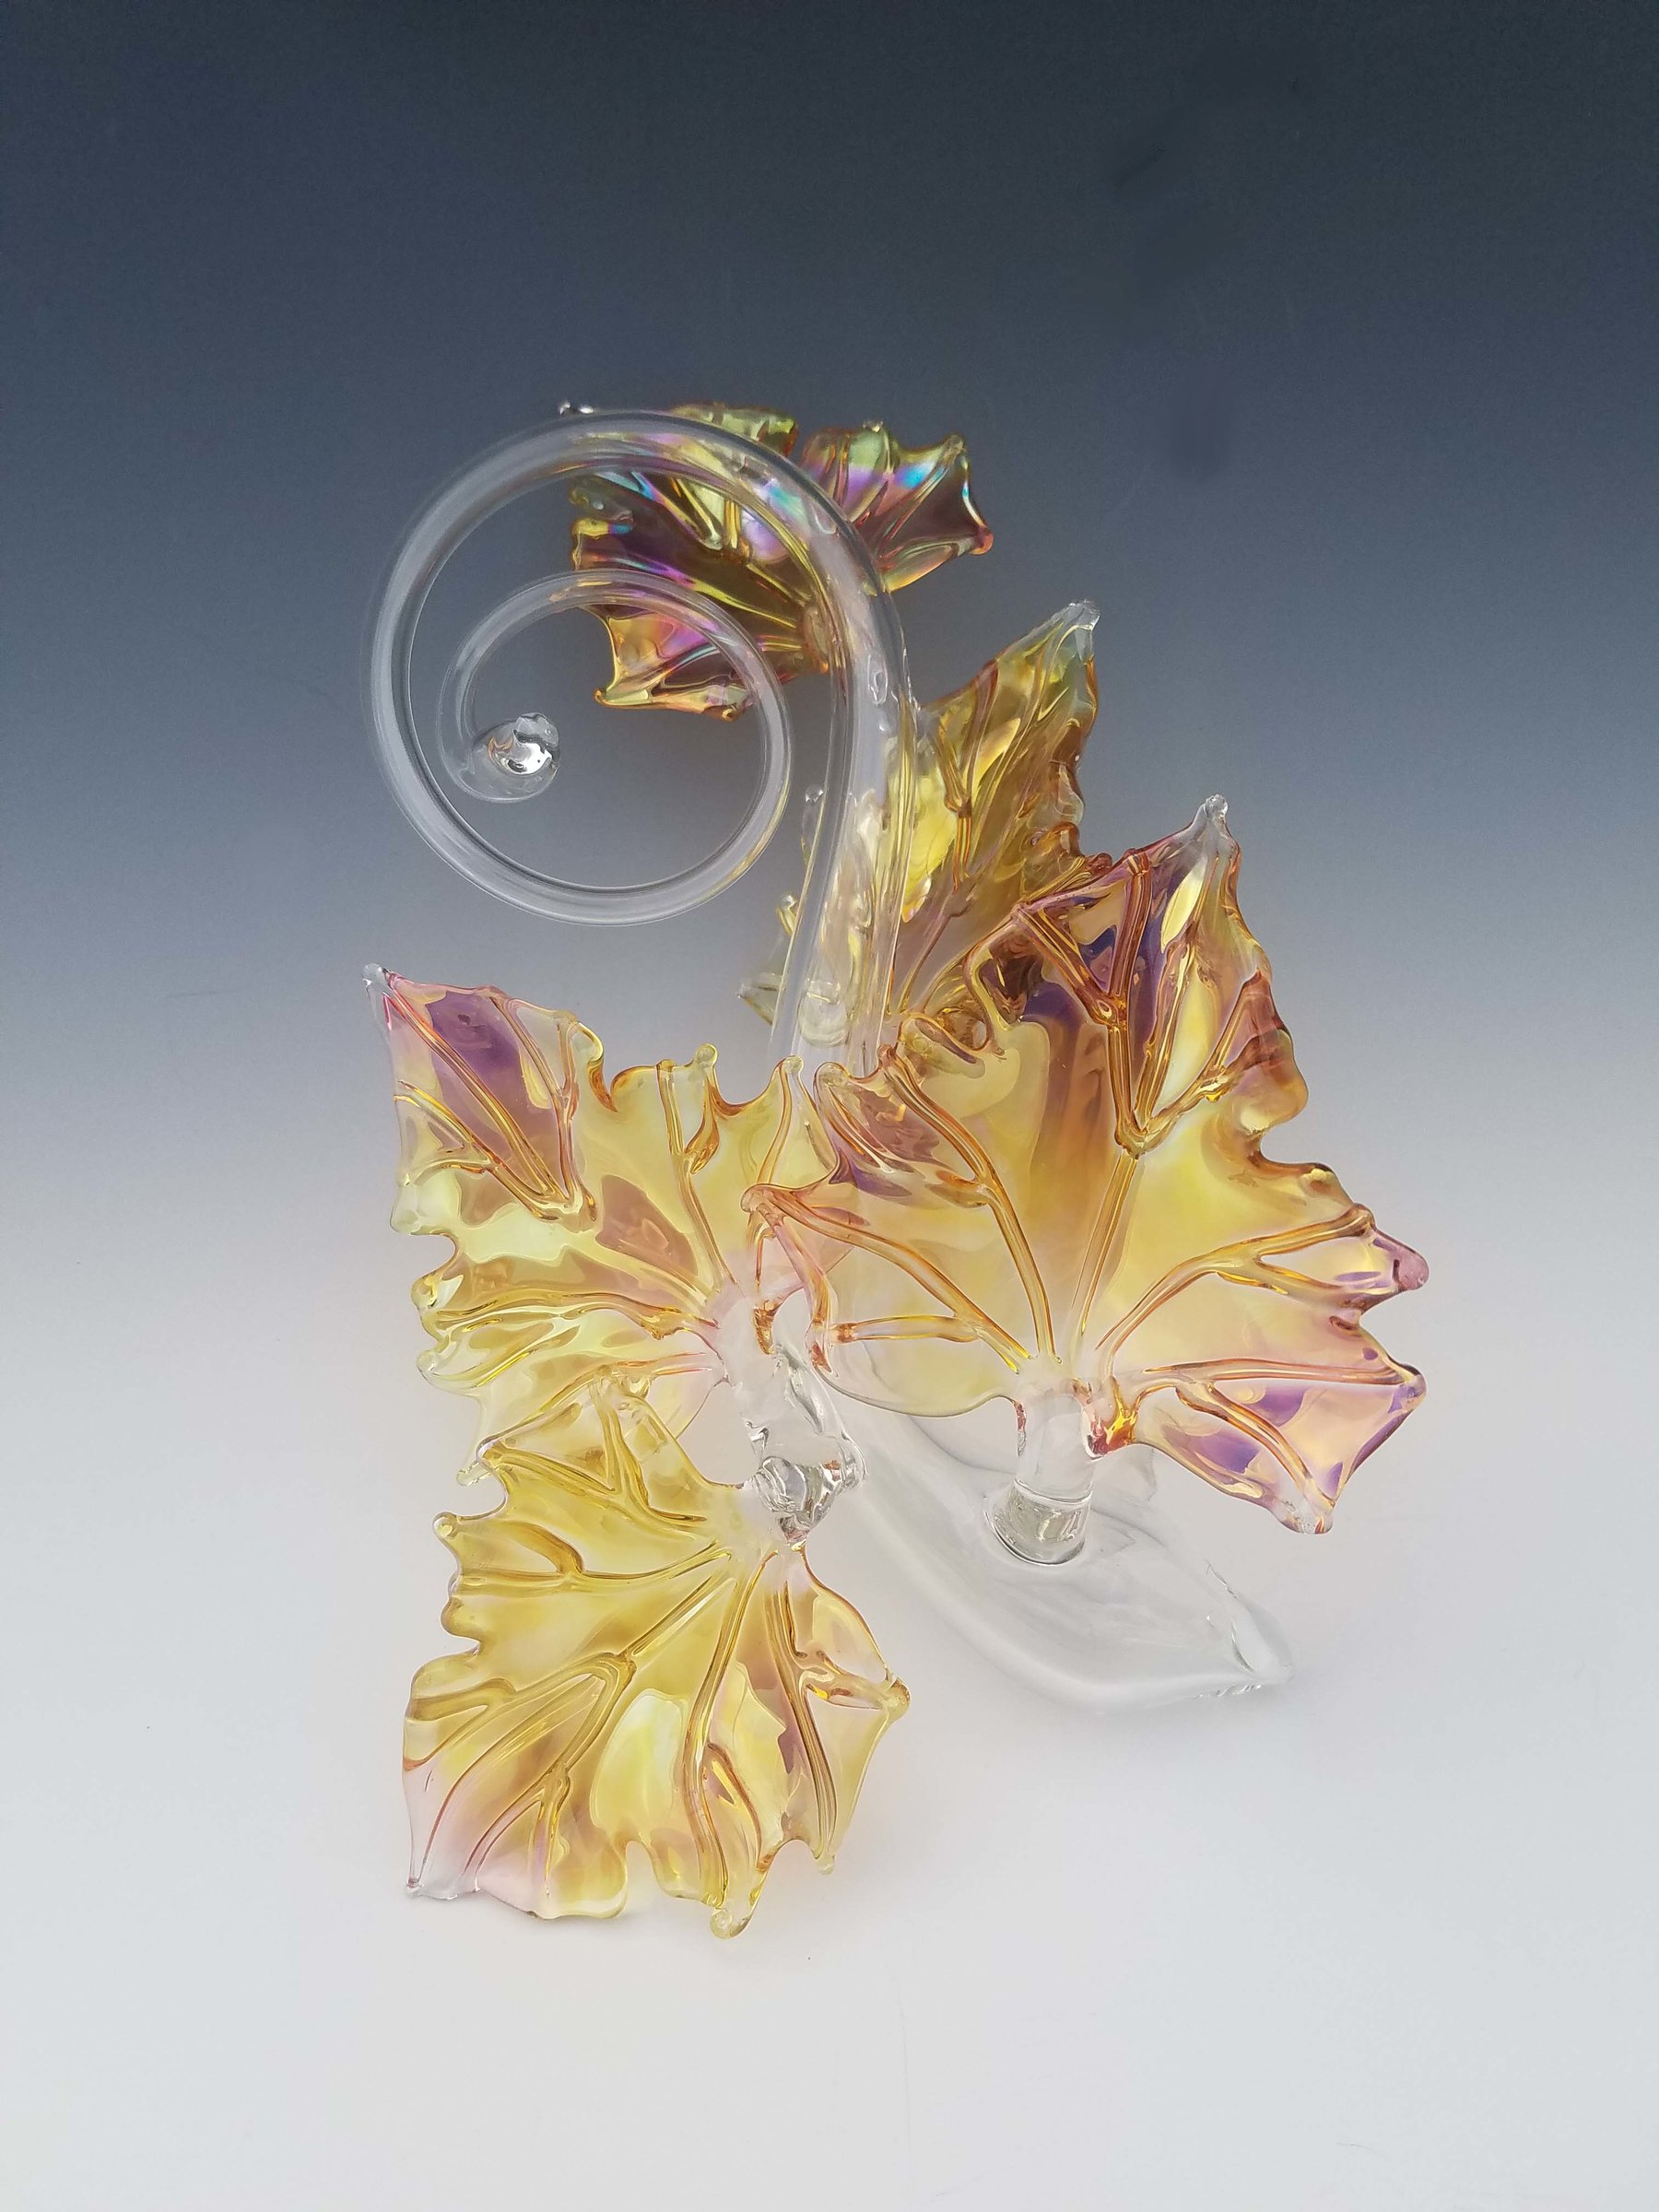 Discover Quintuple Glass Leaf Sculpture in Gold Fume by Jacqueline McKinny